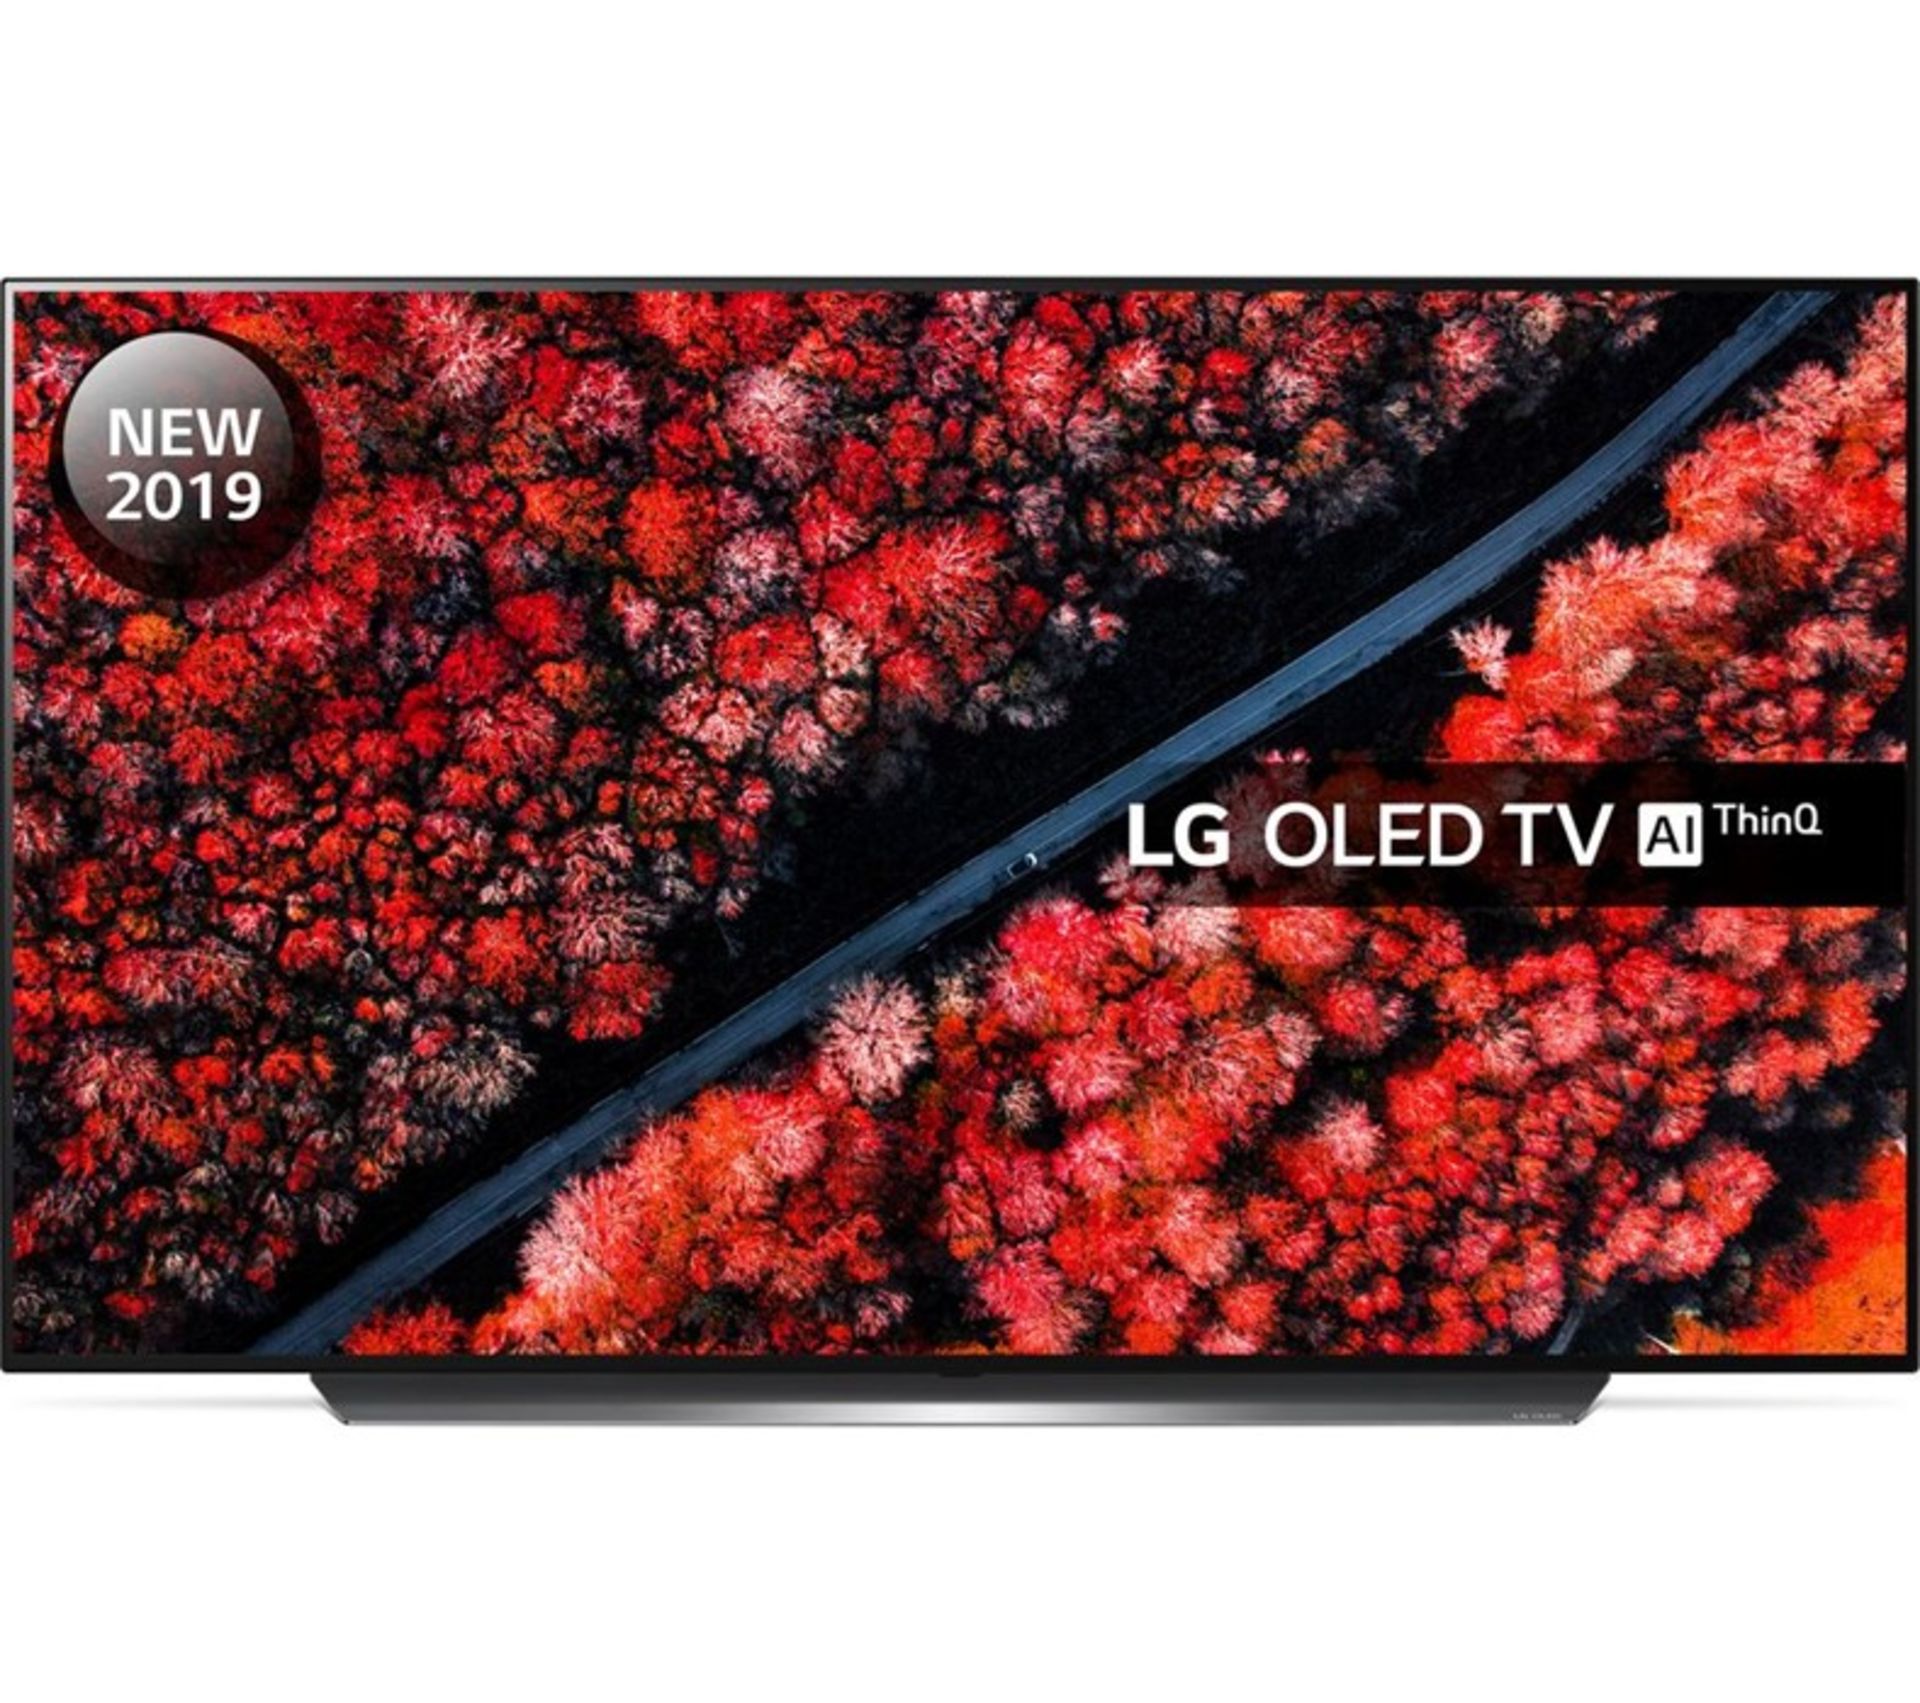 1 BOXED AND UNTESTED LG 55" OLED AI THINQ SMART TV / RRP £1399.00 (PUBLIC VIEWING AVAILABLE)